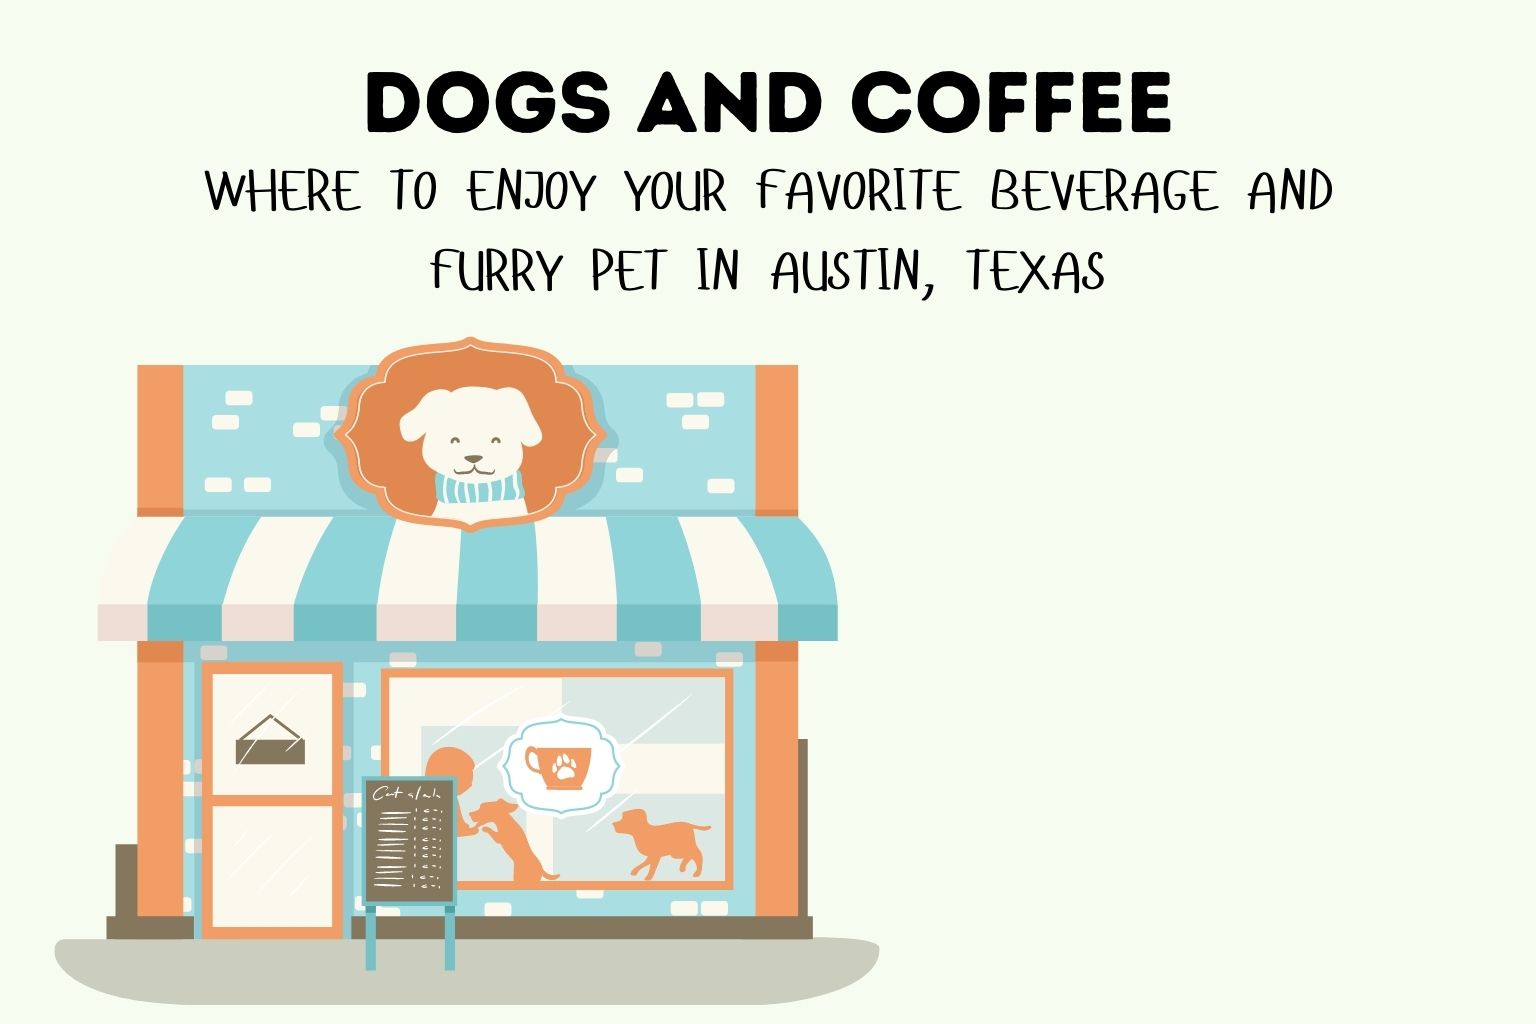 Dogs and Coffee